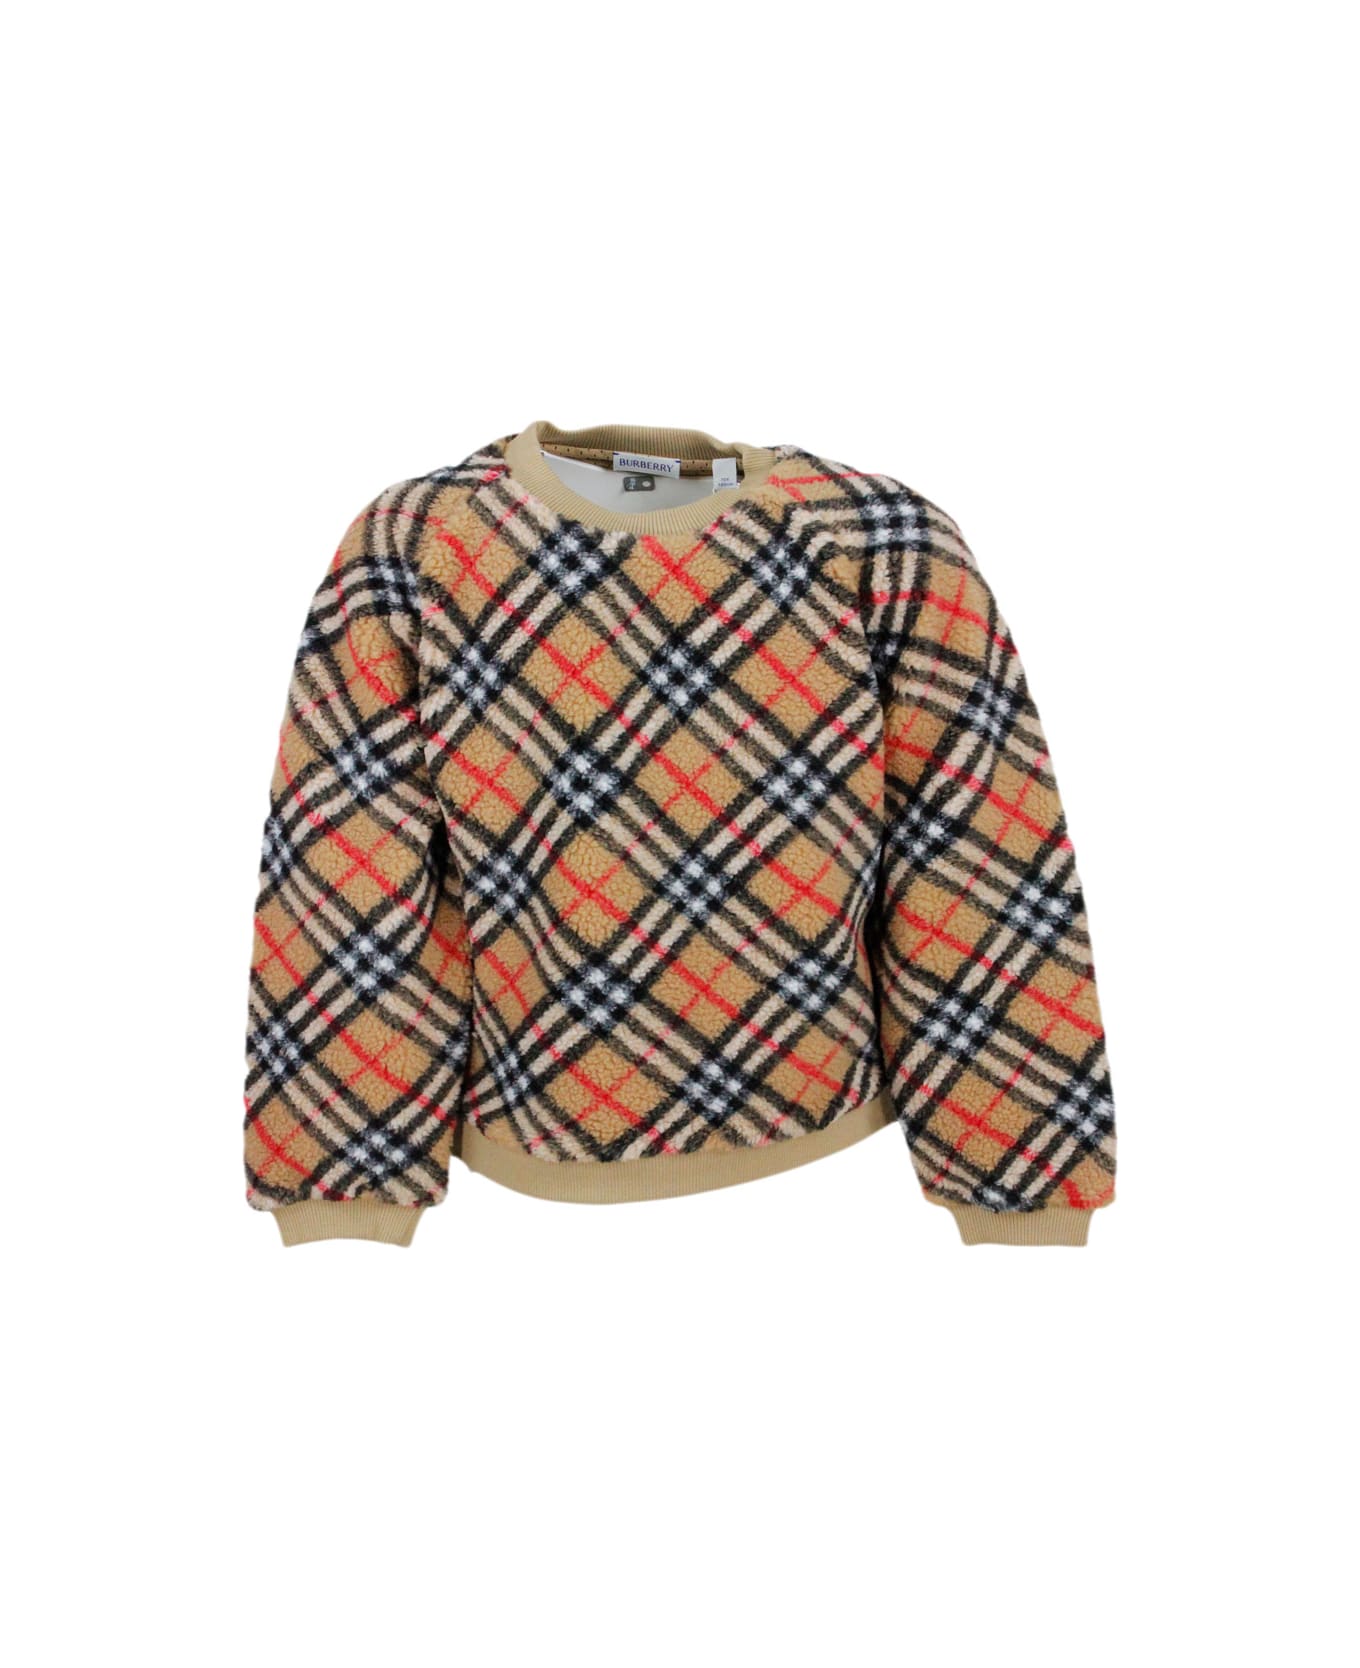 Burberry Long-sleeved Crew-neck Sweater In Fleece With Check Pattern And Ribbed Fabric Cuffs - Beige ニットウェア＆スウェットシャツ